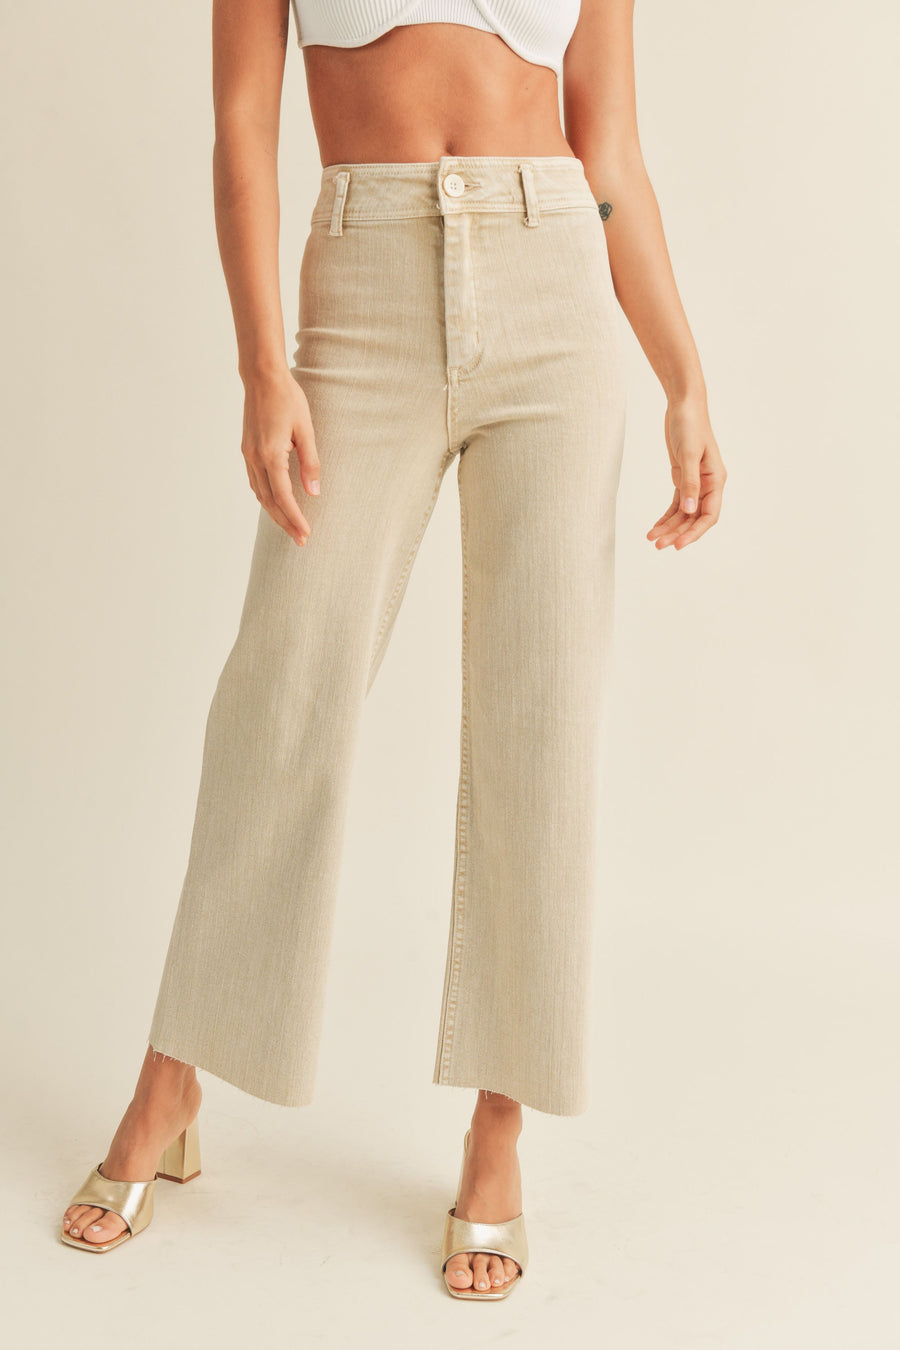 Beige cropped pants with belt loops and highwaisted fit. 